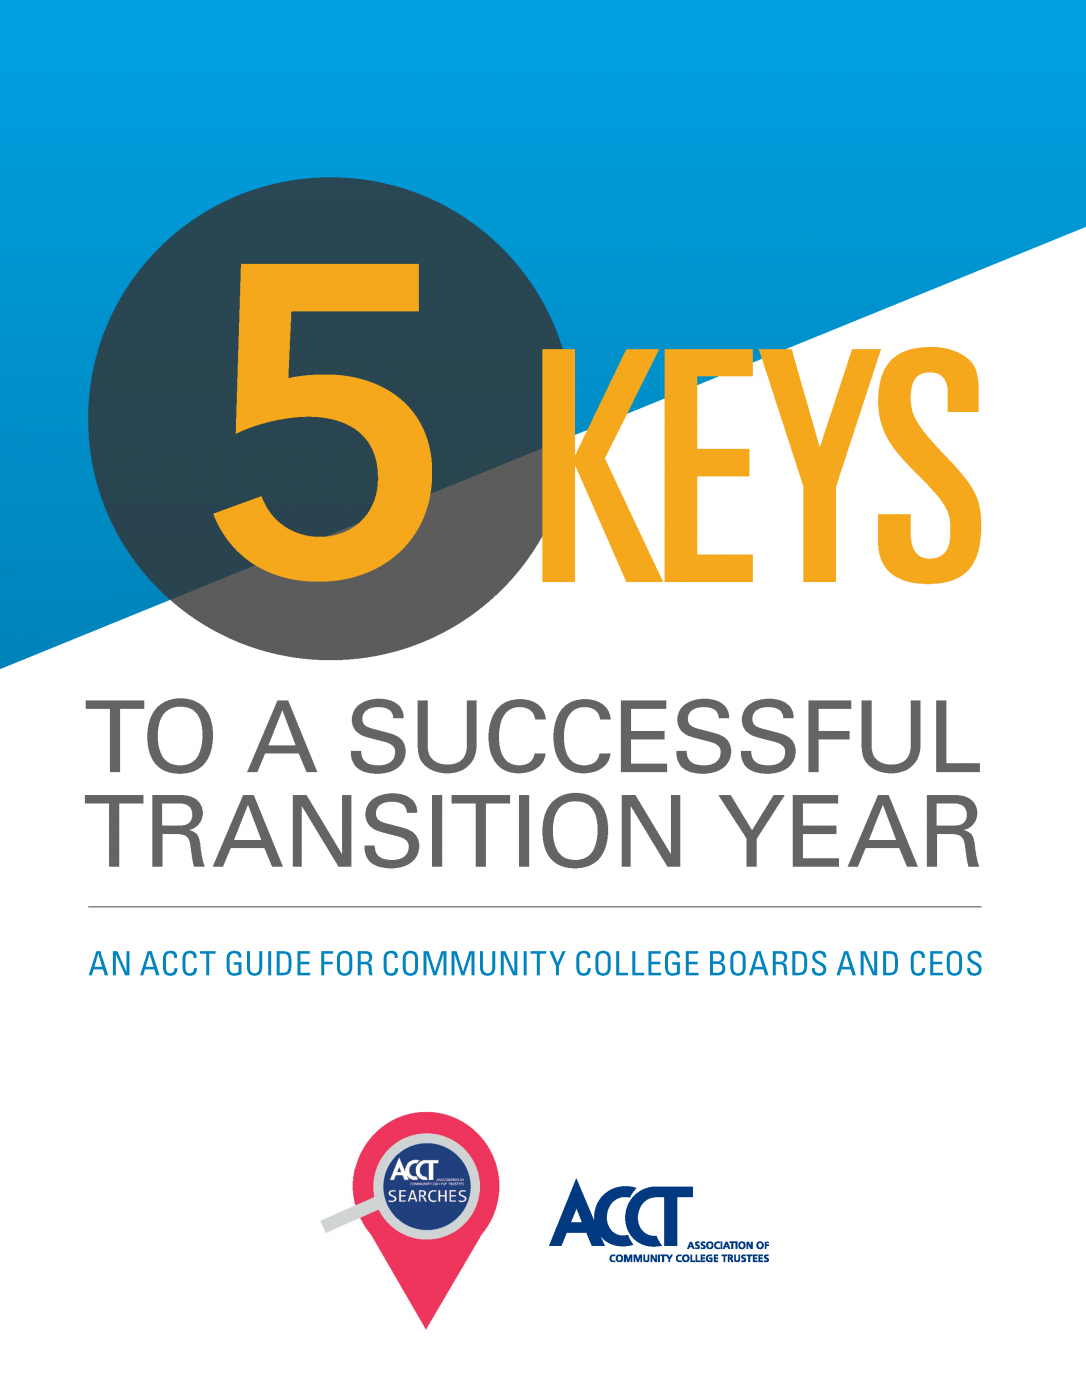 5 Keys to a Successful Transition Year for Community College CEOs and Boards by ACCT